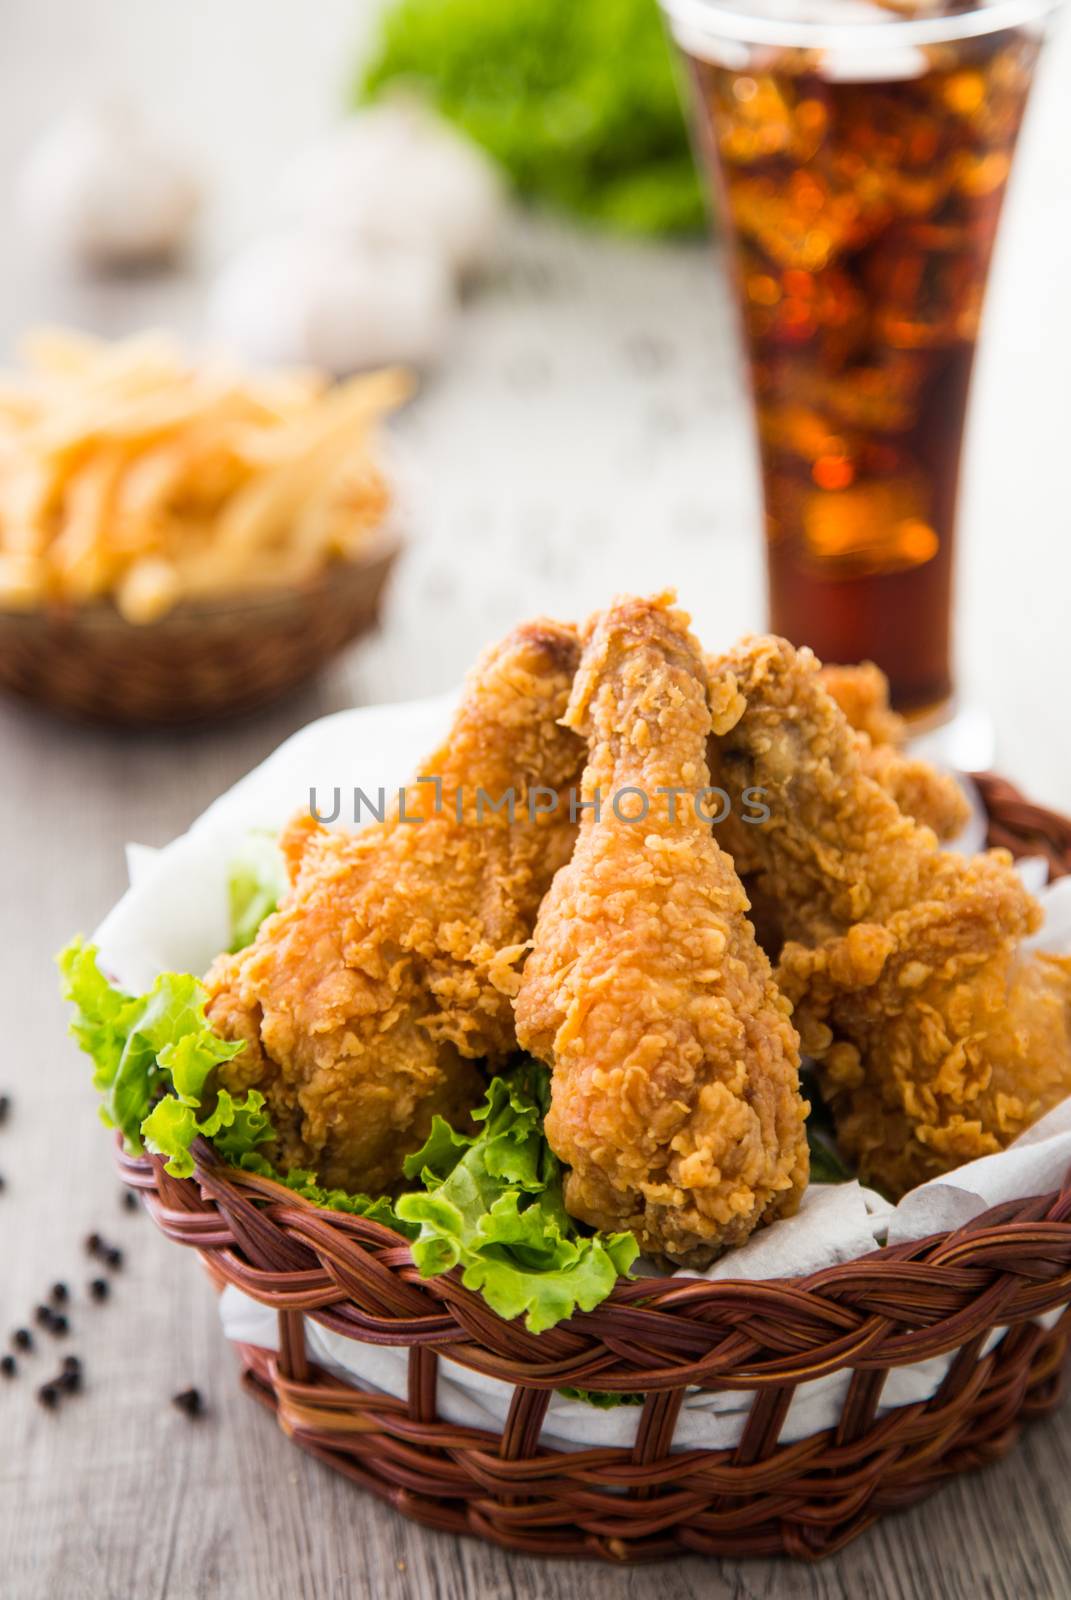 drum stick fried chicken by tehcheesiong